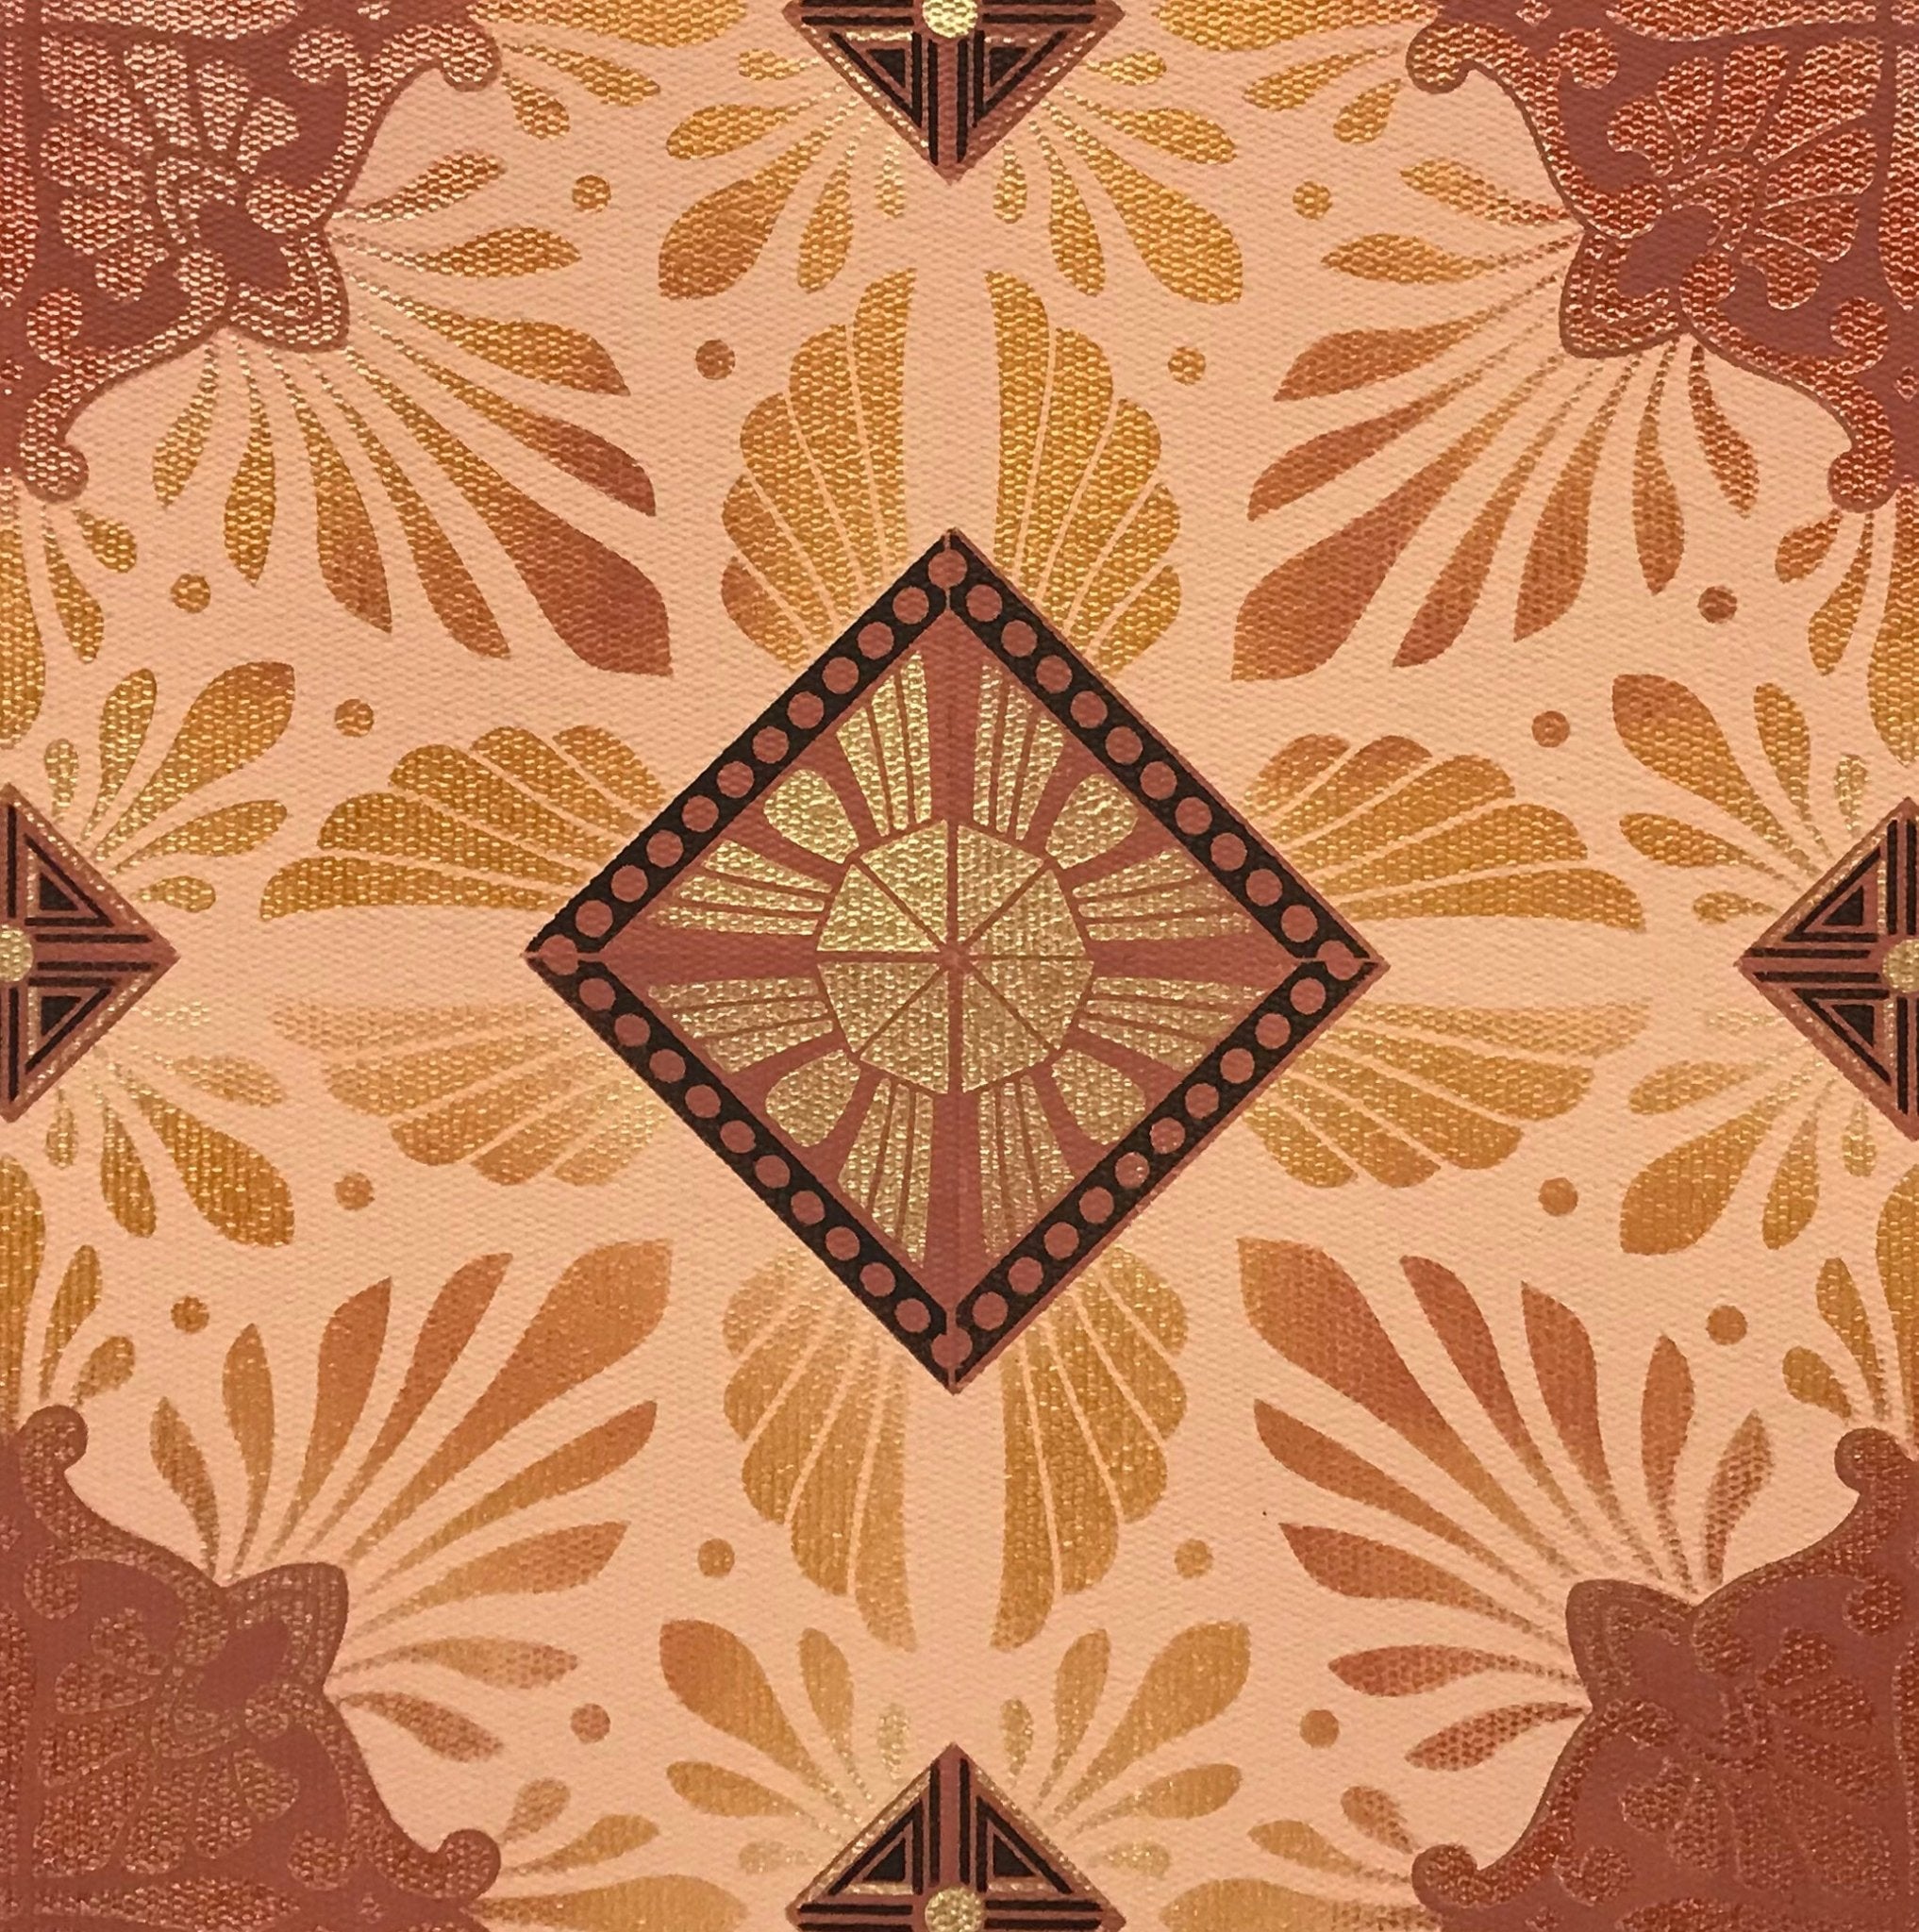 A close up of the diamond sunburst motif in this floorcloth, Greek Deco #3, based on a pattern from Christopher Dresser's "Studies in Design", c.1875.